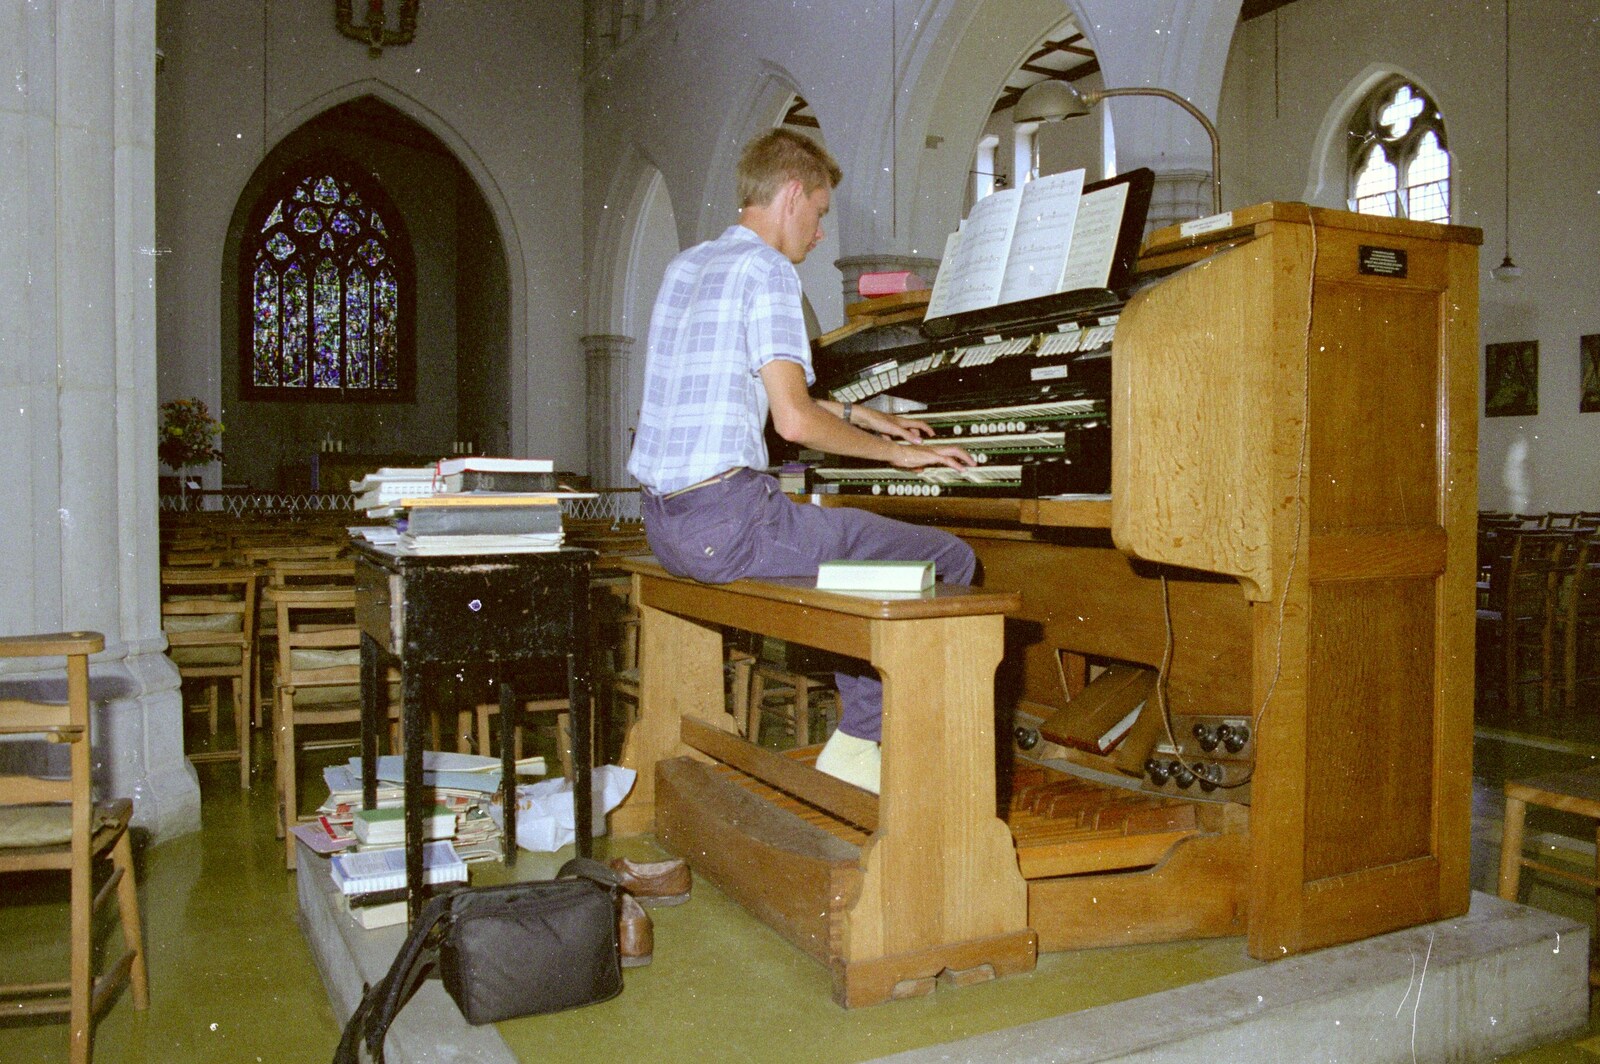 Uni: Country Clubs, On The Beach and Organs, Plymouth - 28th May 1989: Organ action in St. Peter's Church, Wyndham Square